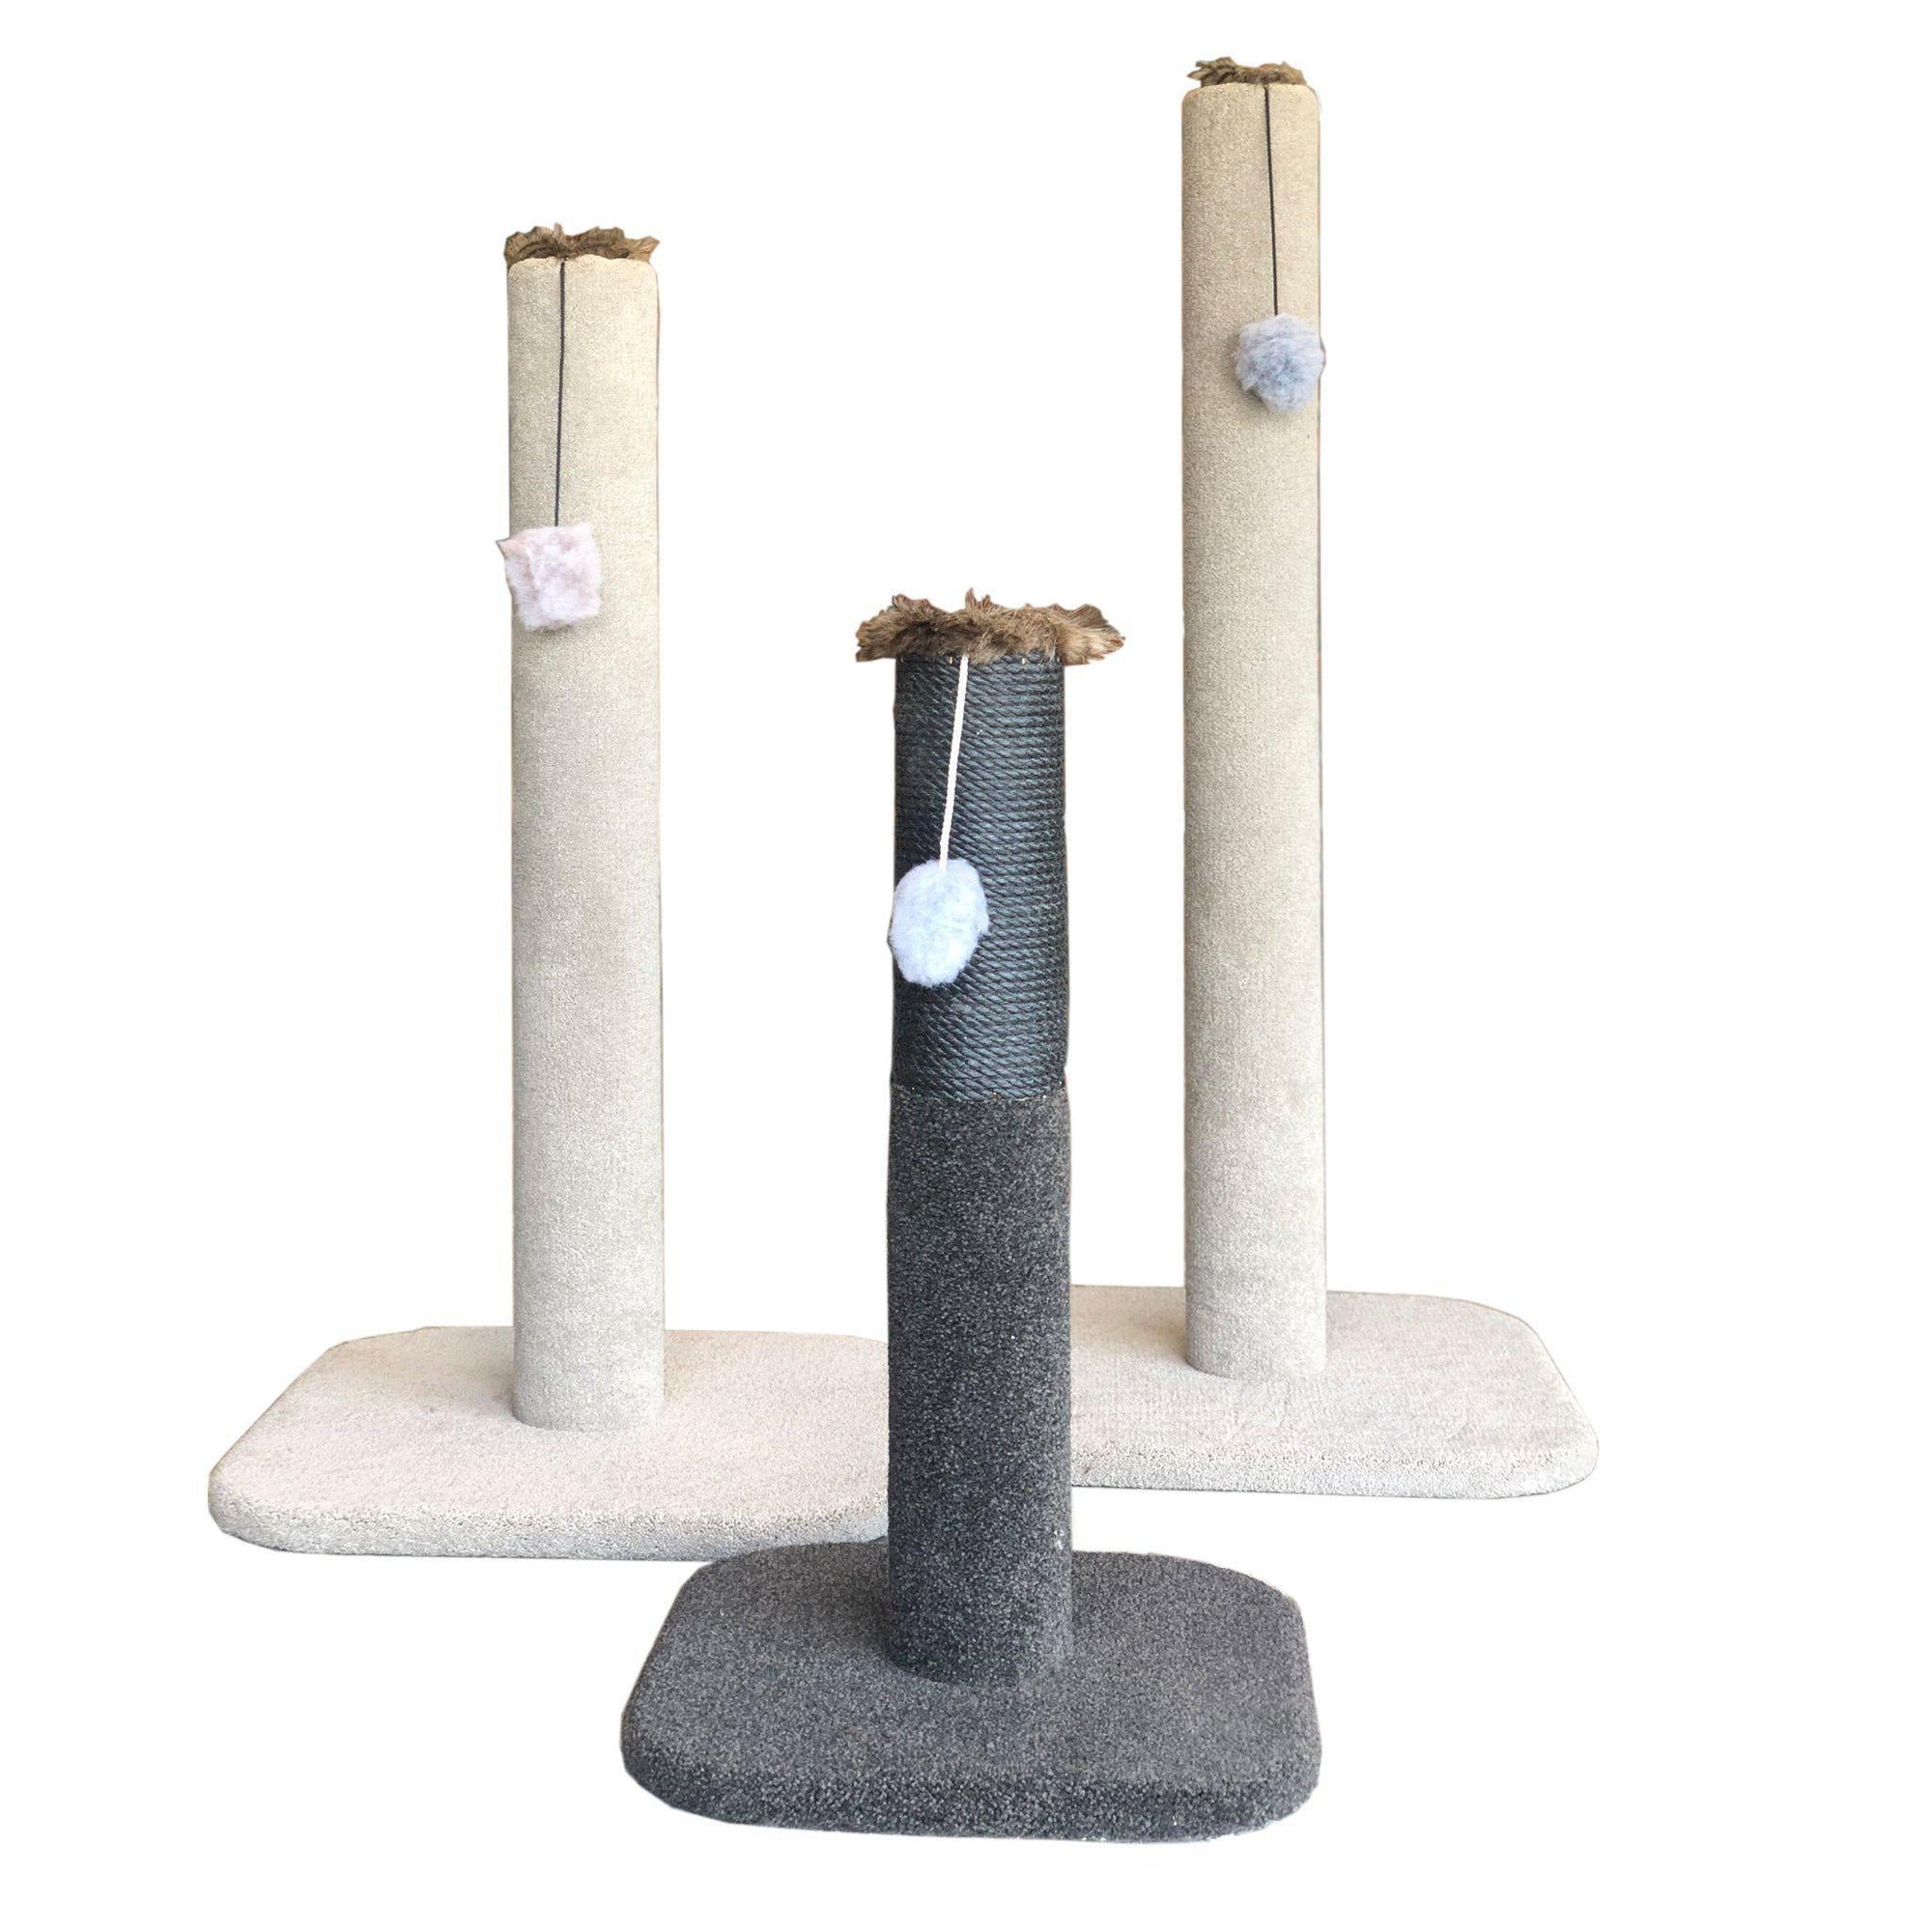 KatAttack Giant Scratching Posts - ComfyPet Products